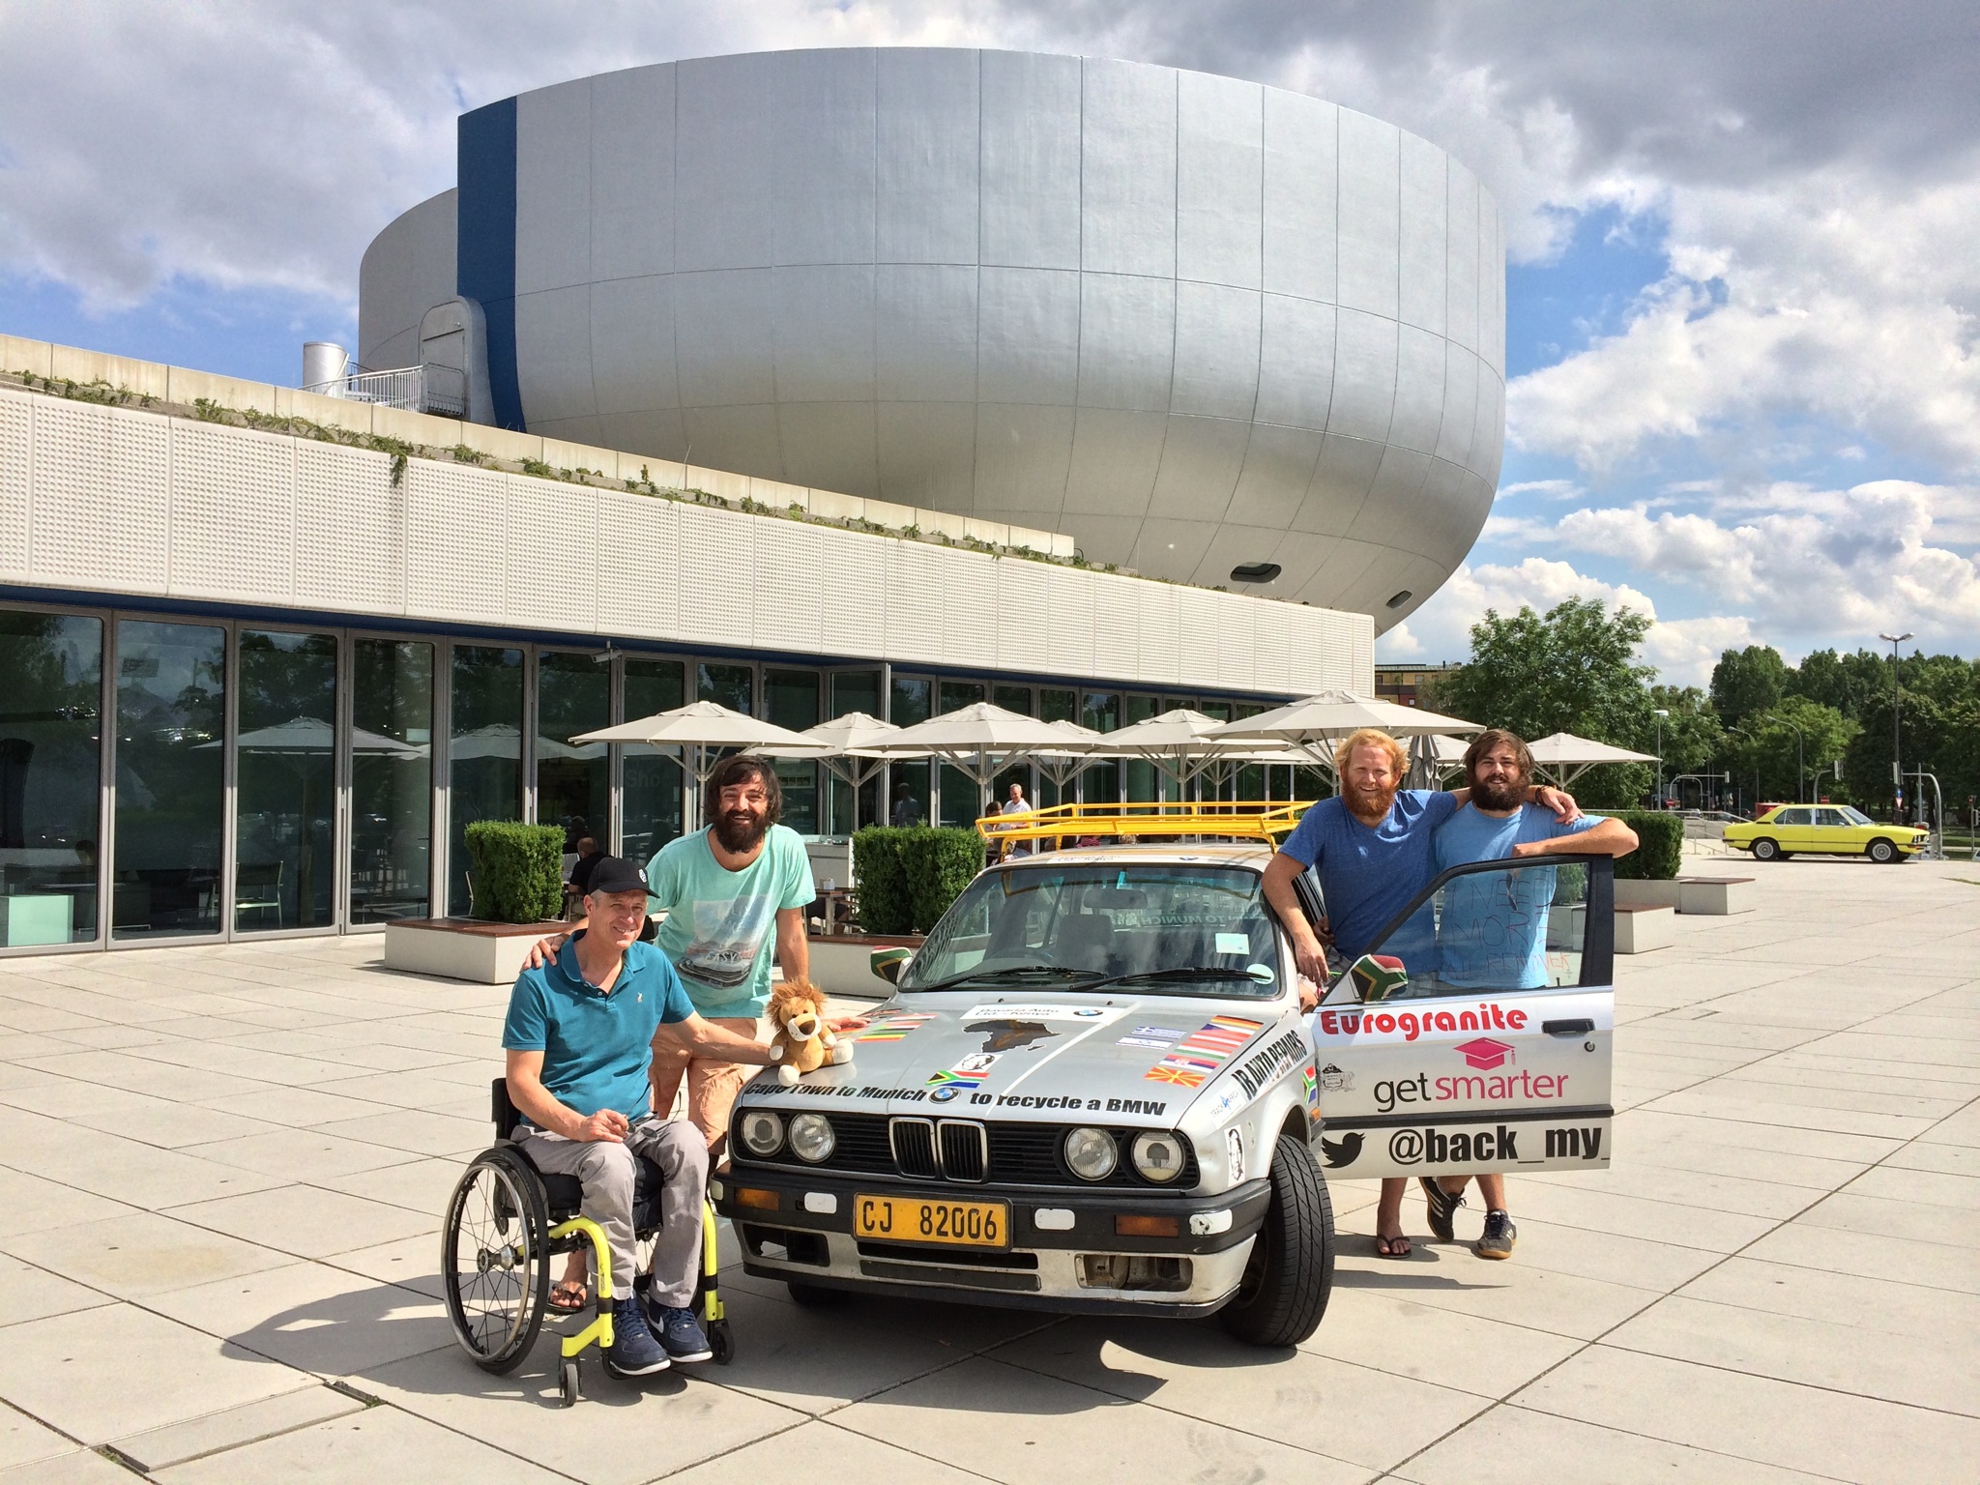 The BMW journey from Cape Town to Munich